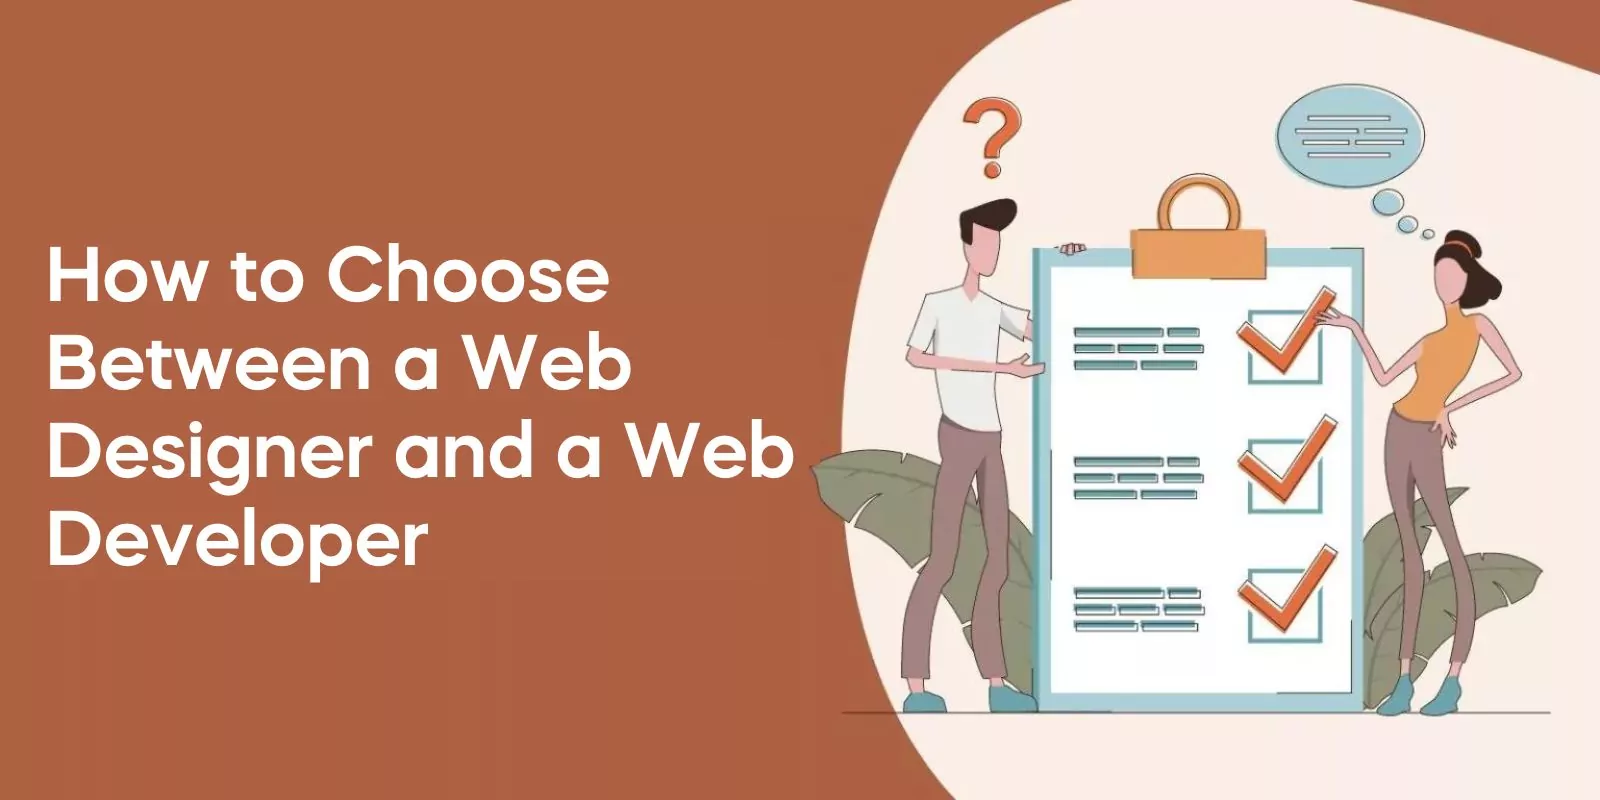 How to Choose Between a Web Designer and a Web Developer